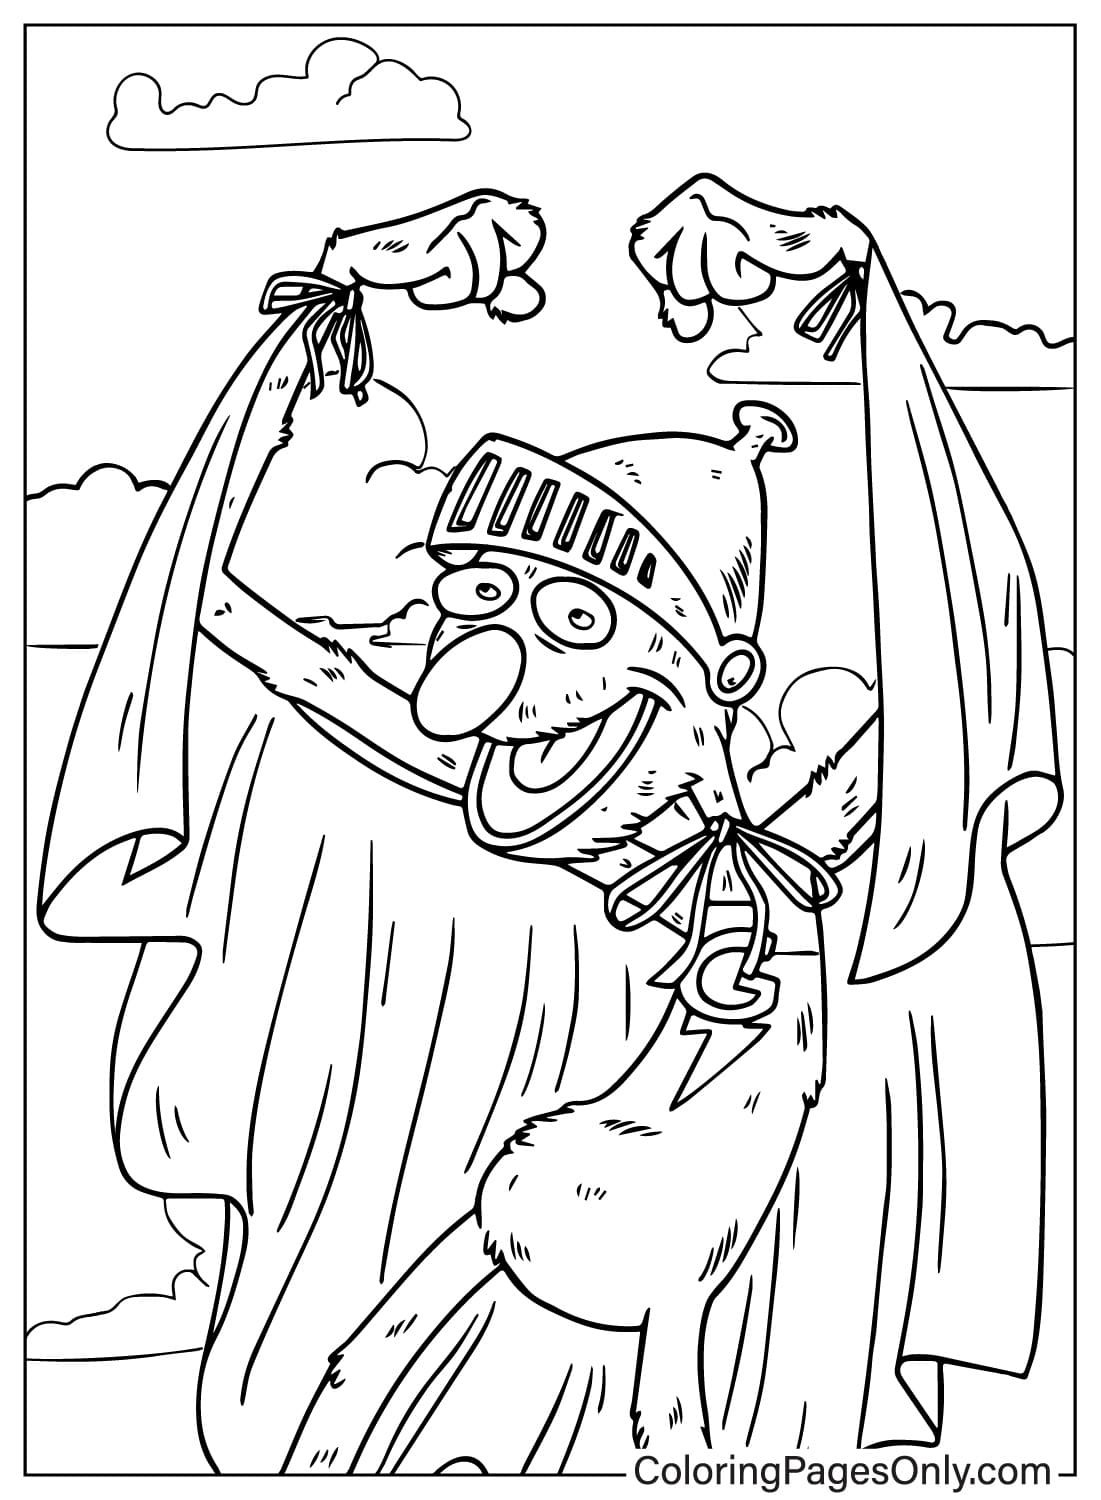 Free Grover Coloring Page from Grover